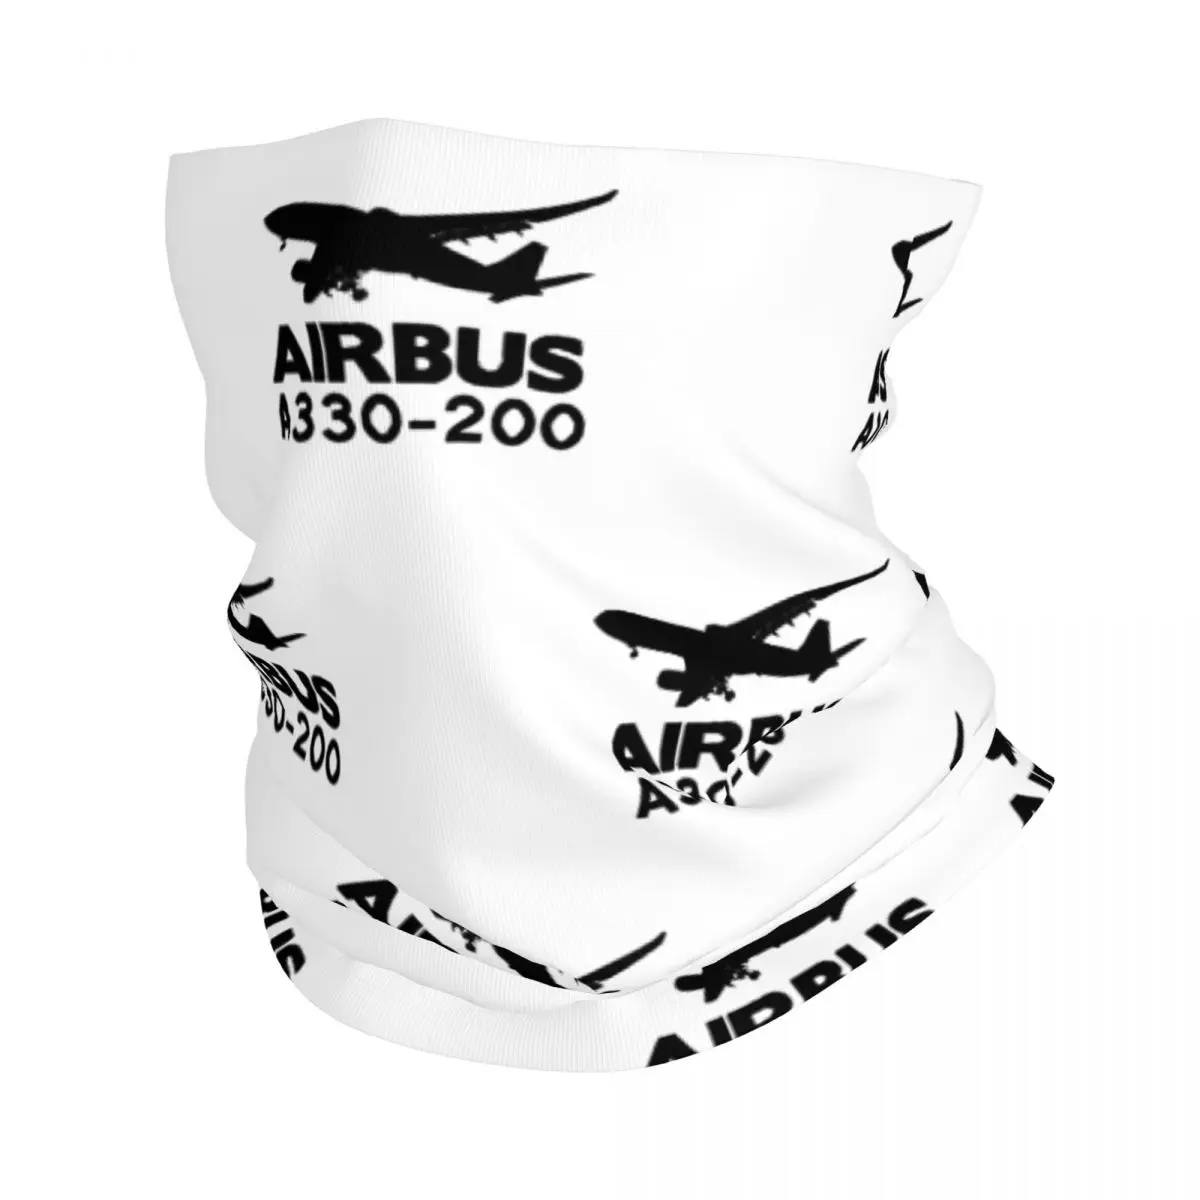 

Airbus A330 Bandana Neck Cover Printed Airline Airplane Balaclavas Mask Scarf Cycling Riding for Men Women Adult Washable